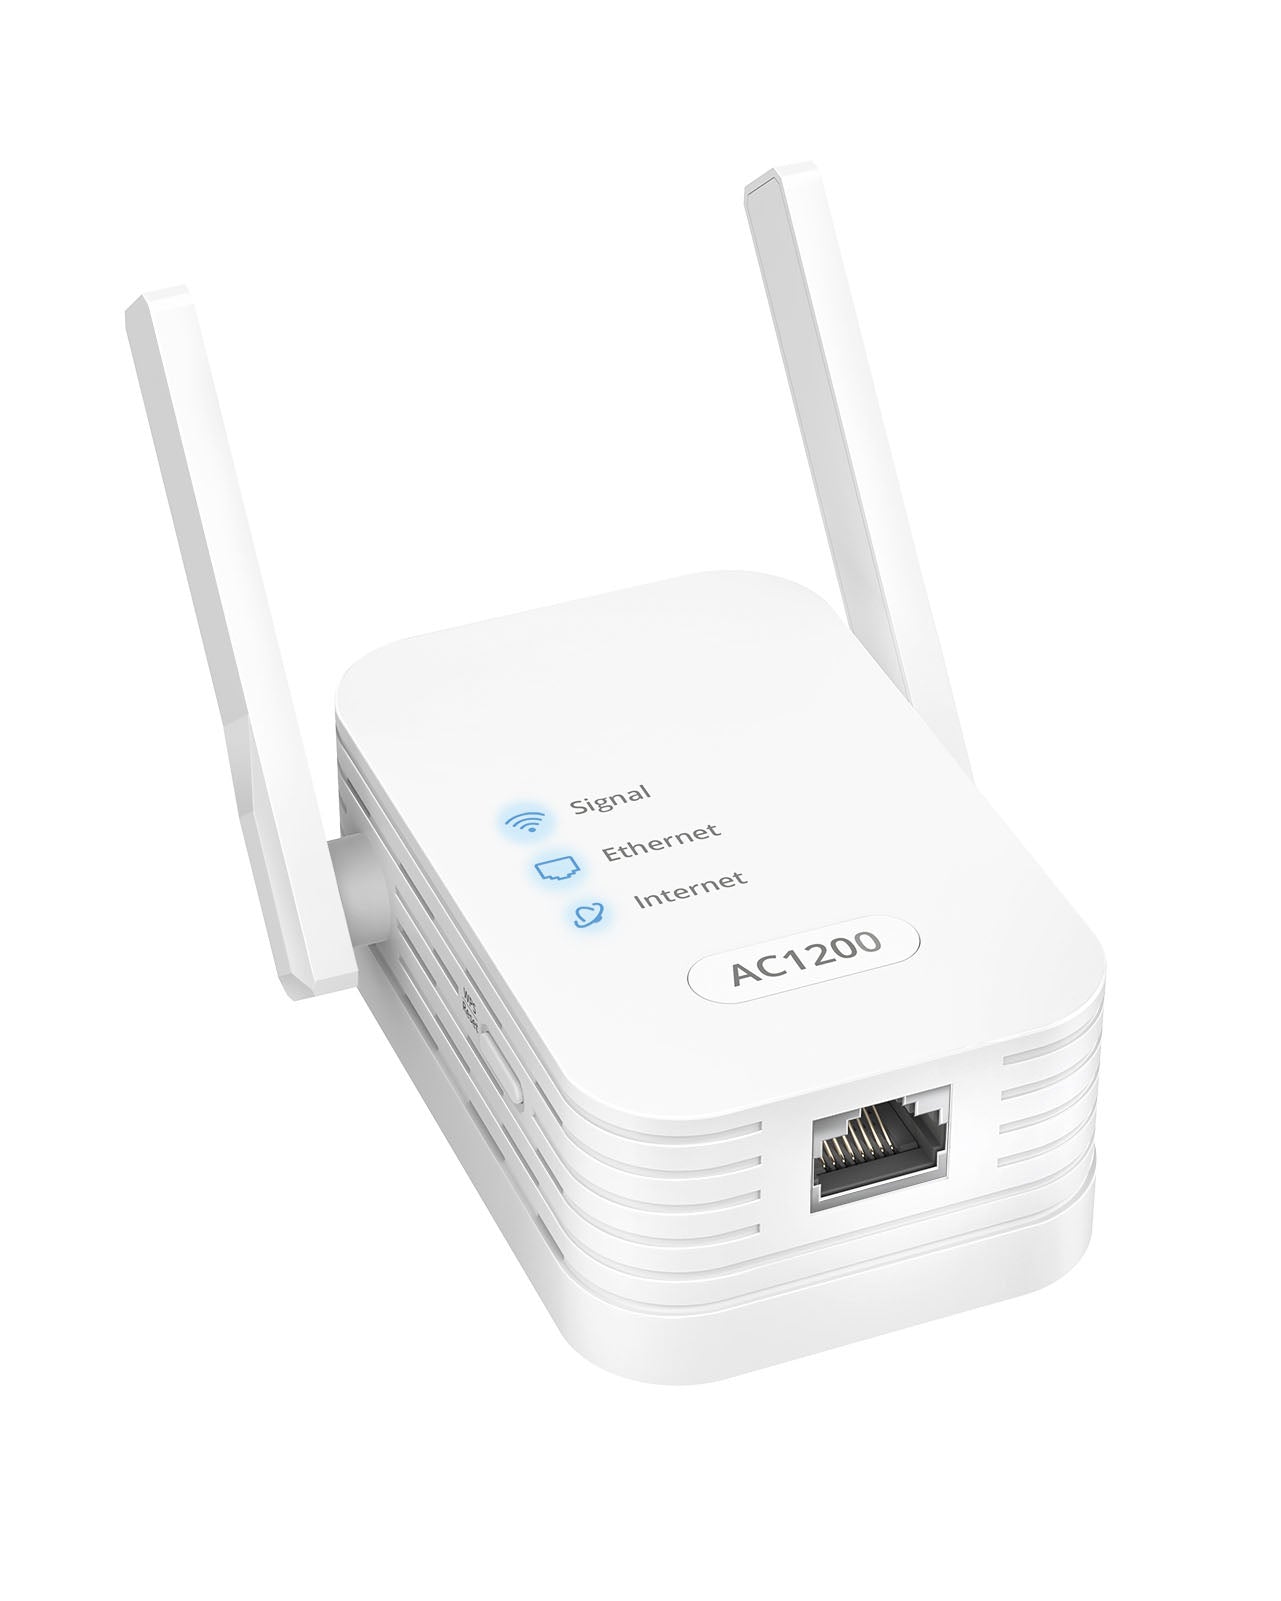 AC1200Mbps Universal WiFi to Ethernet Adapter